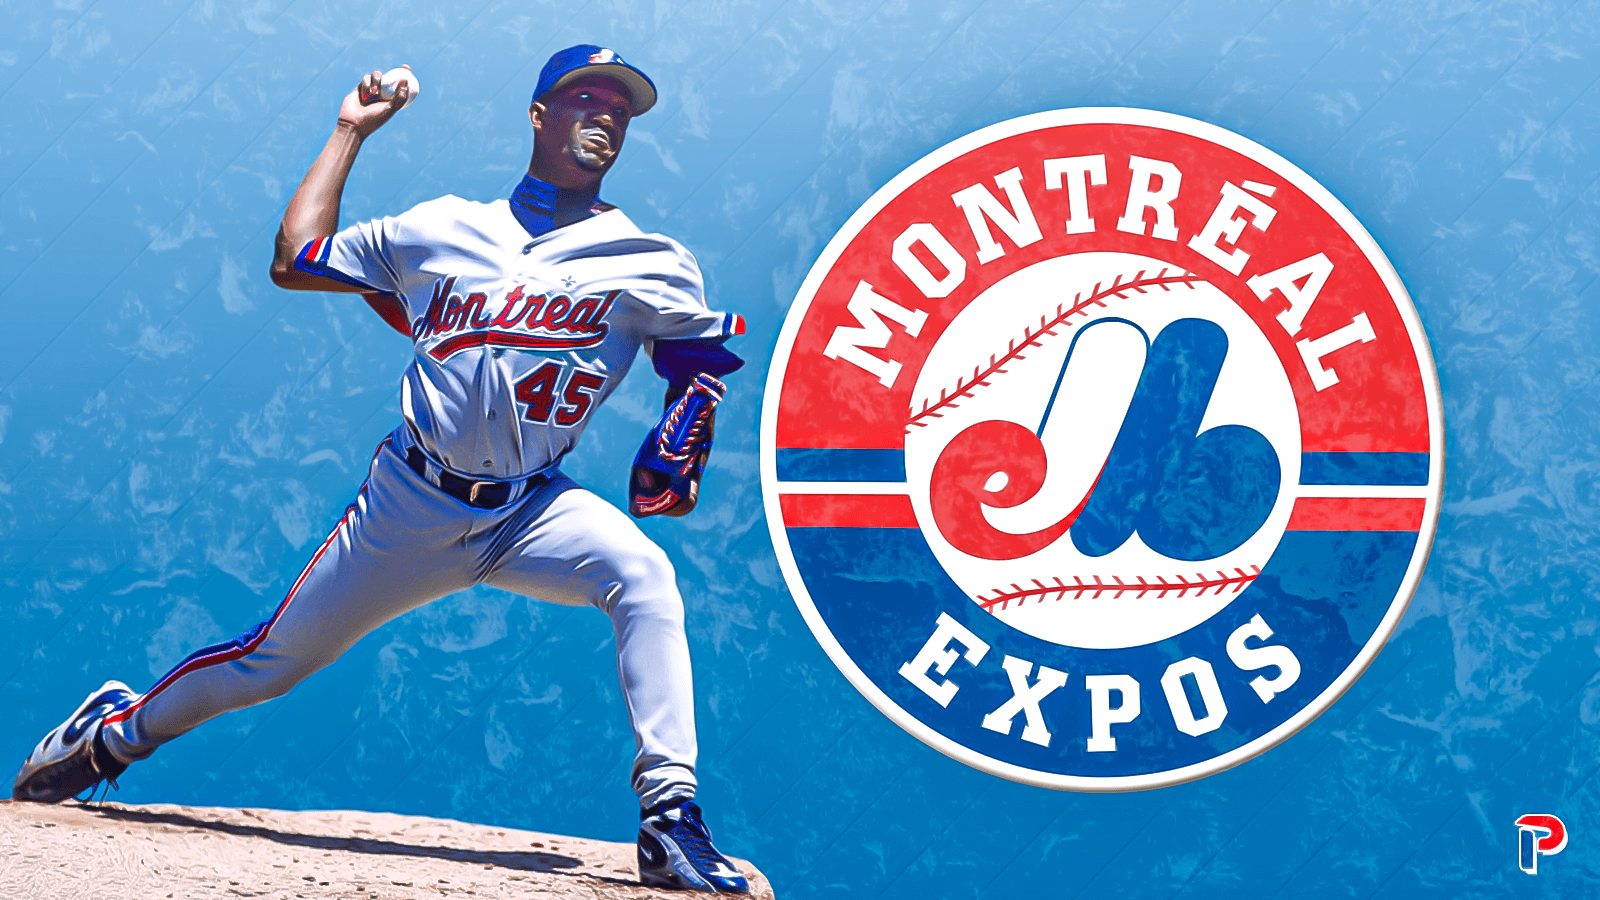 The Montreal Expos in 2020, Pt. 1 - 1994 and the beginning of the end